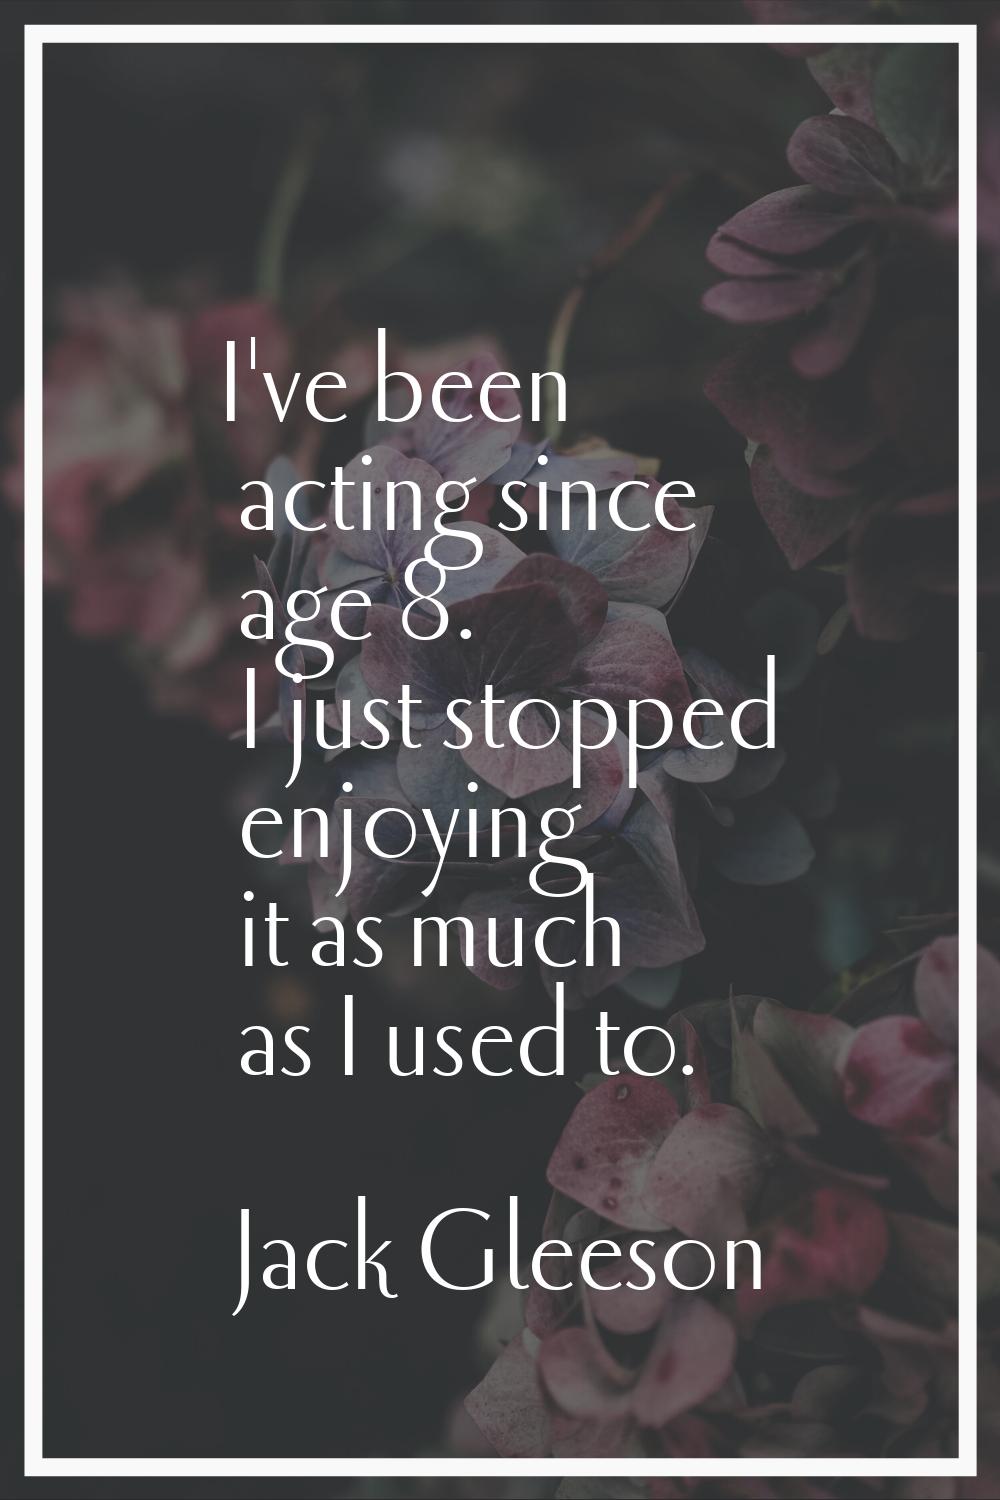 I've been acting since age 8. I just stopped enjoying it as much as I used to.